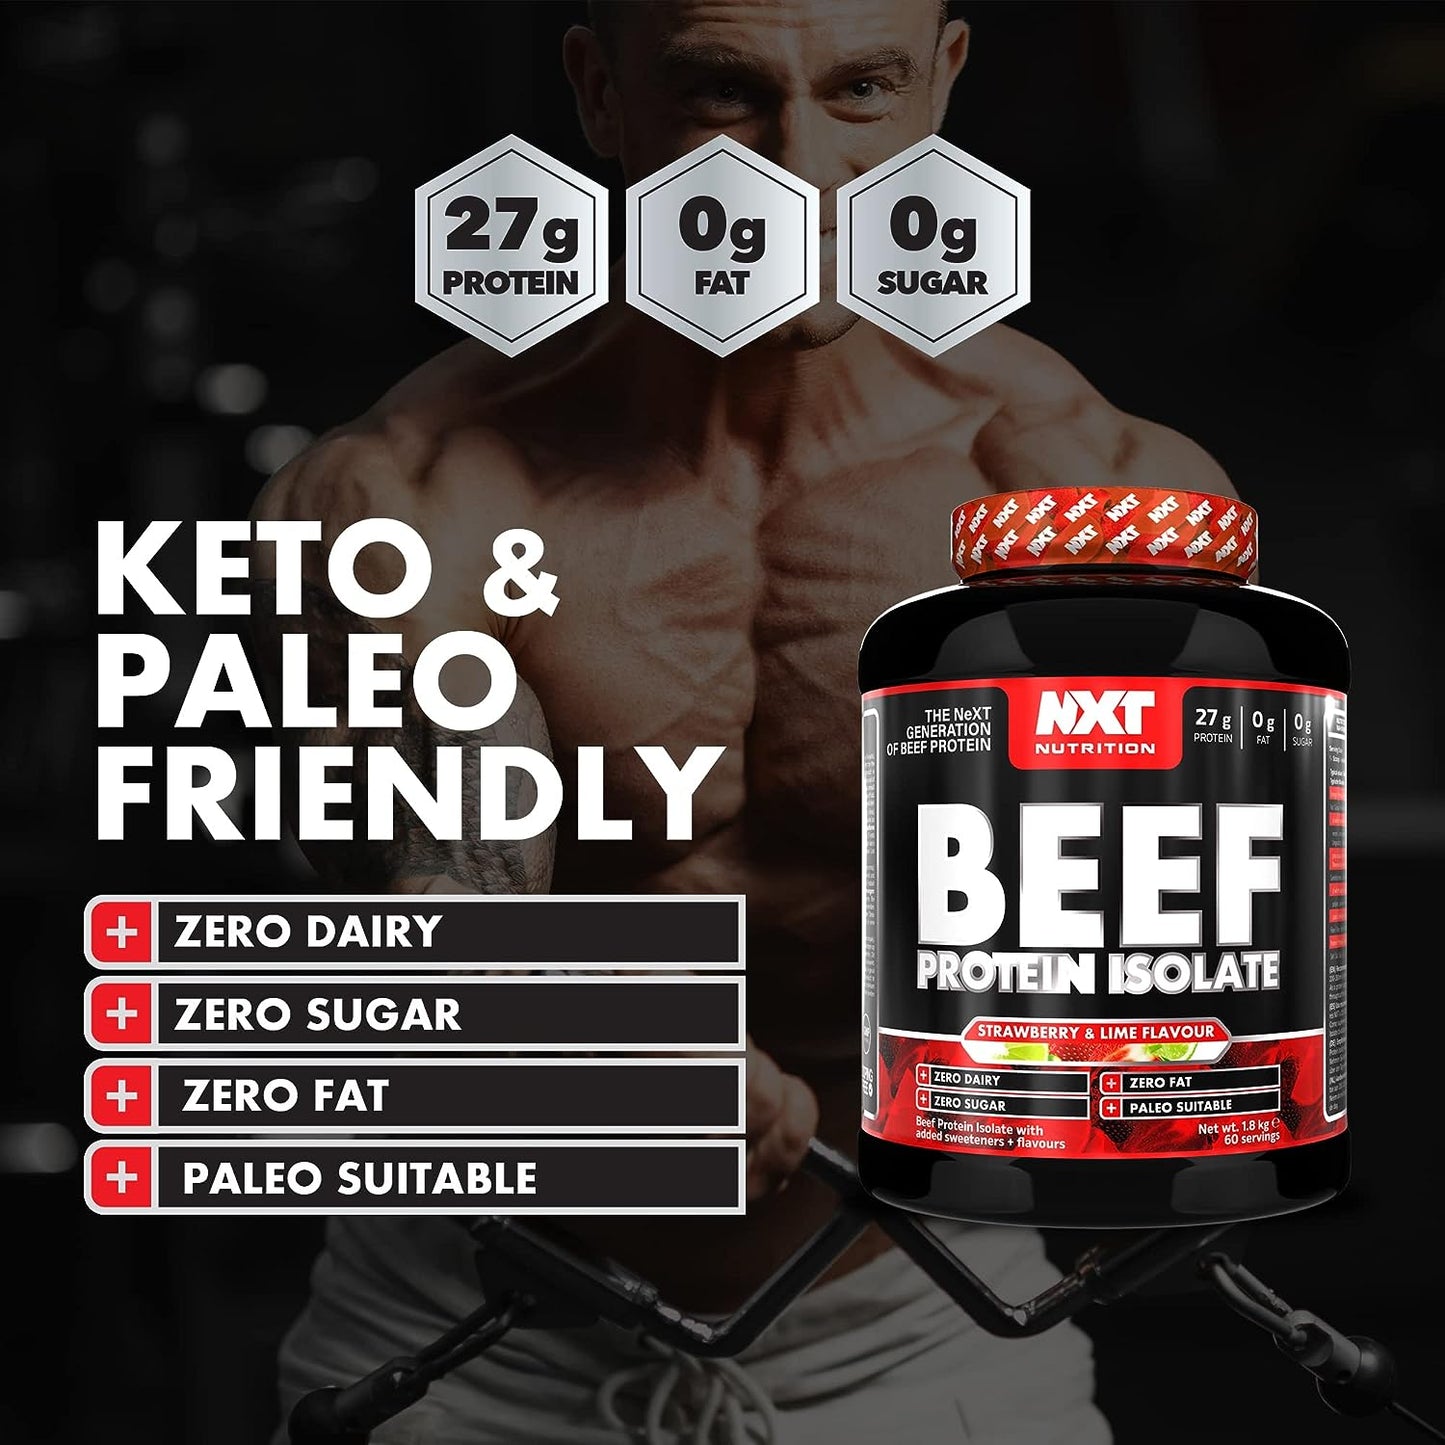 NXT - Beef Protein Isolate Strawberry & Lime 1.8 kg